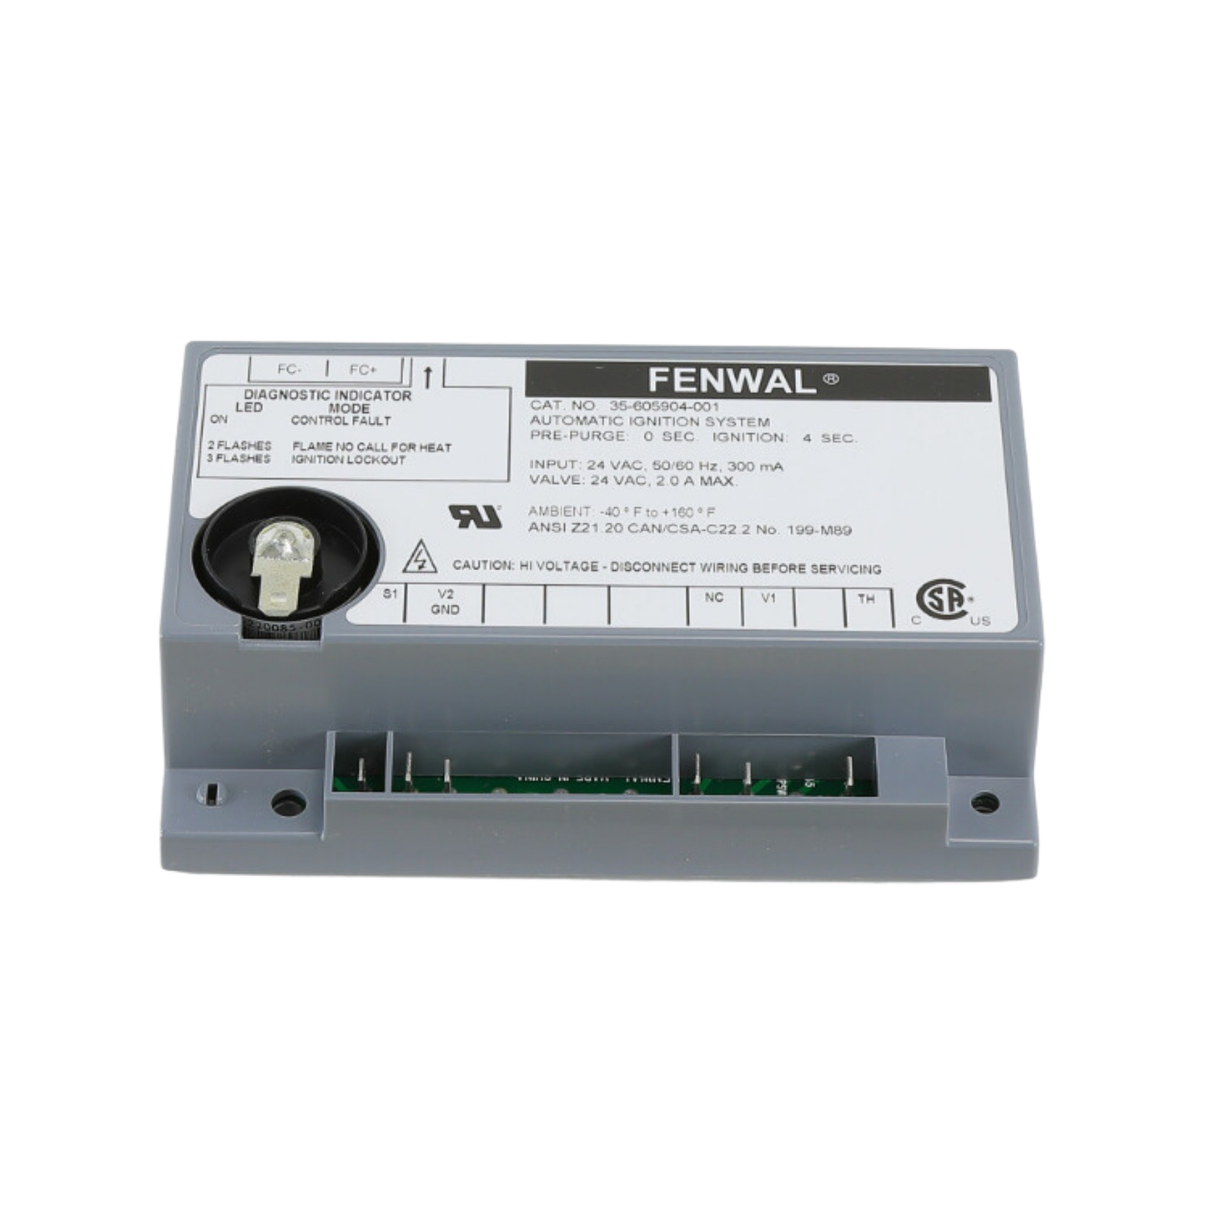 Fenwal 35-605904-001 24VAC, 0 Pre-Purge, 0 Inter-Purge, 4s Ignition Time, Special Heat and Glow, Direct Spark Ignition Module